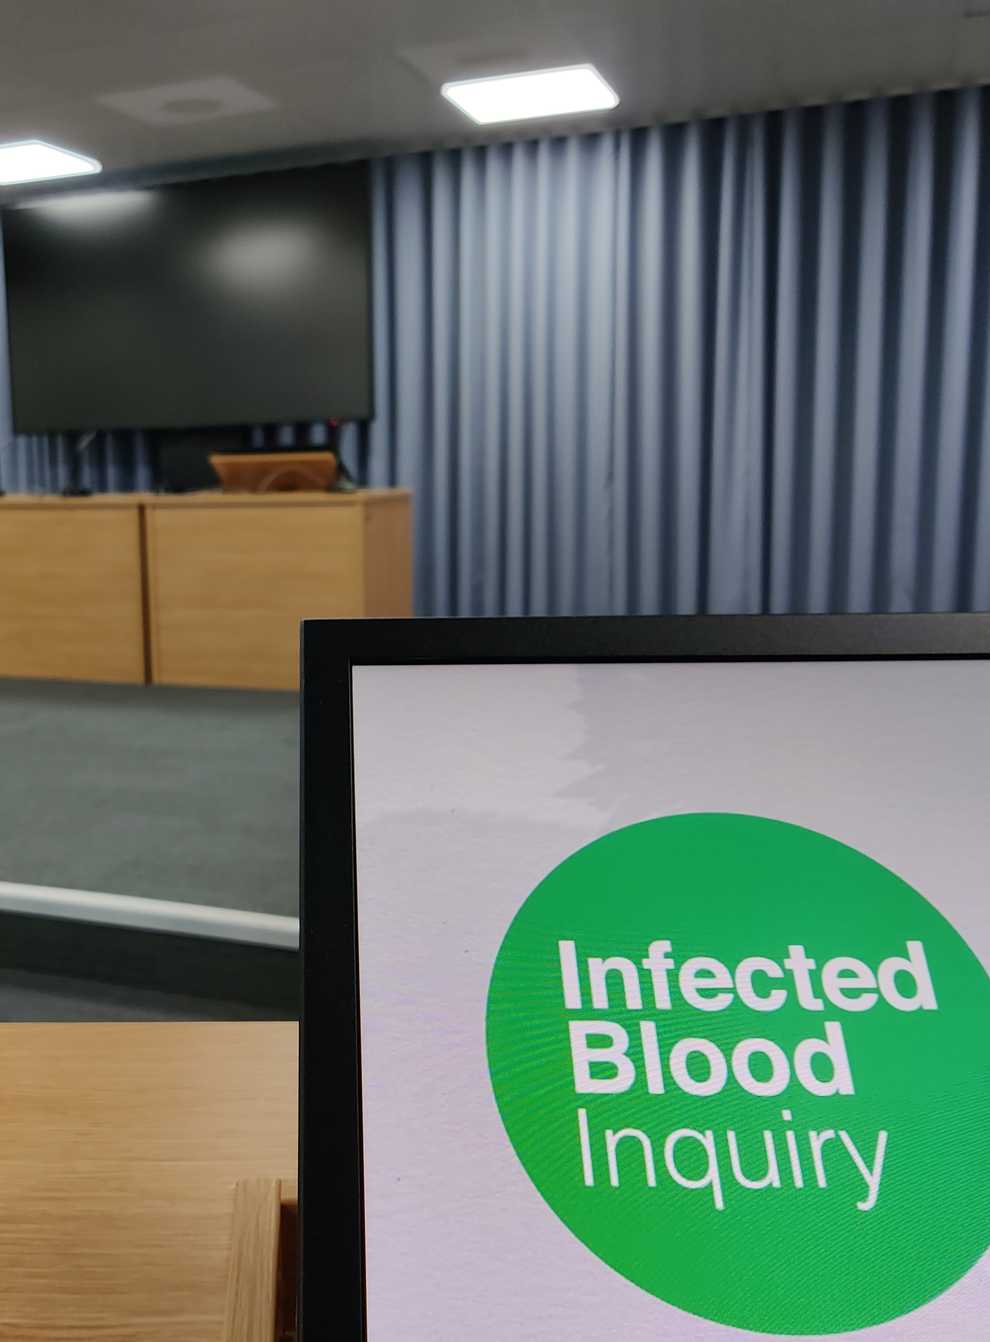 (Infected Blood Inquiry/PA)